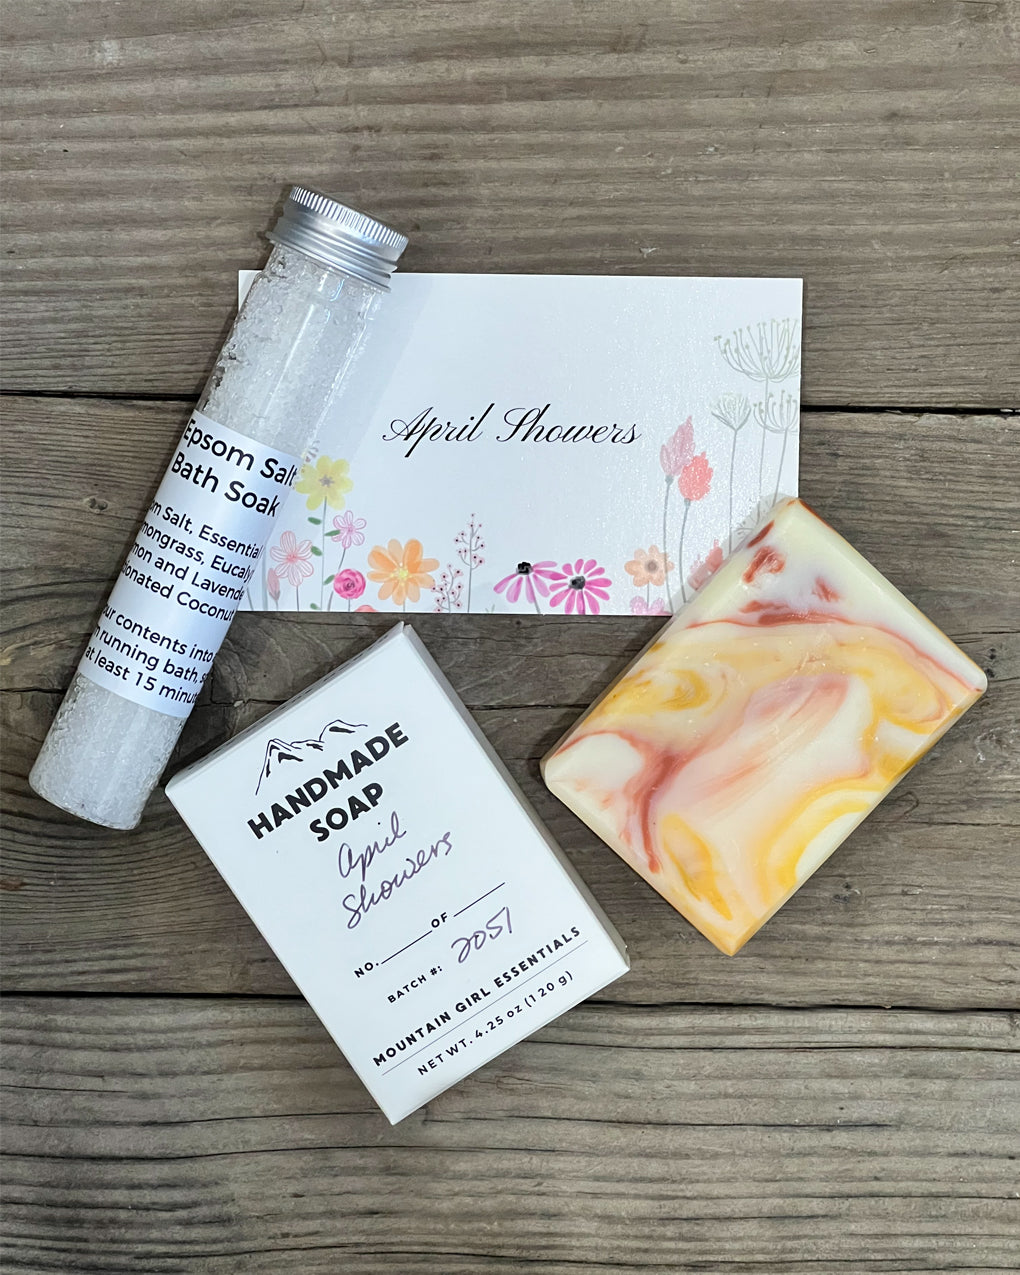 Soap of The Month Club